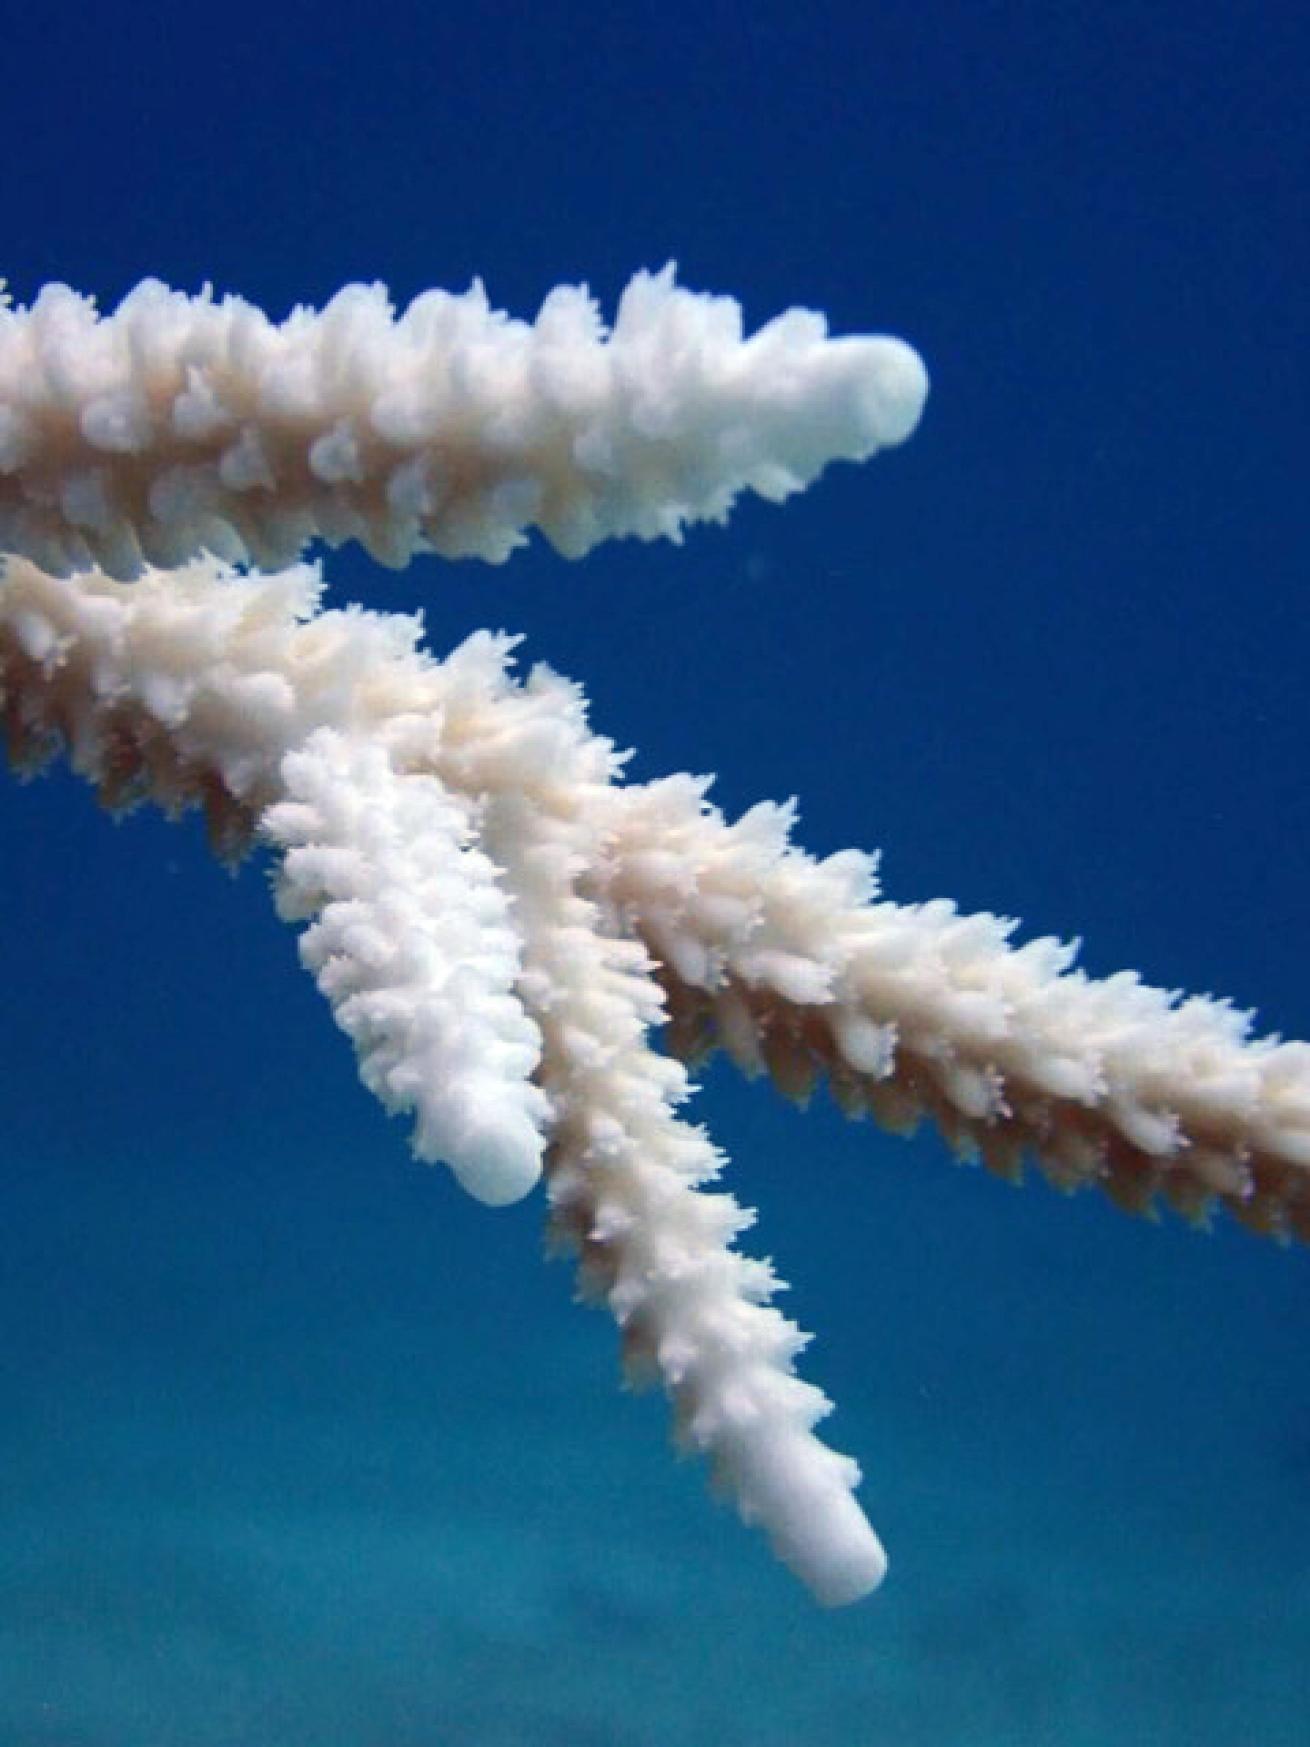  Bleached coral appears white because the colorful photosynthetic algae that lives in their tissues are ejected when the colony is stressed.
bahamas